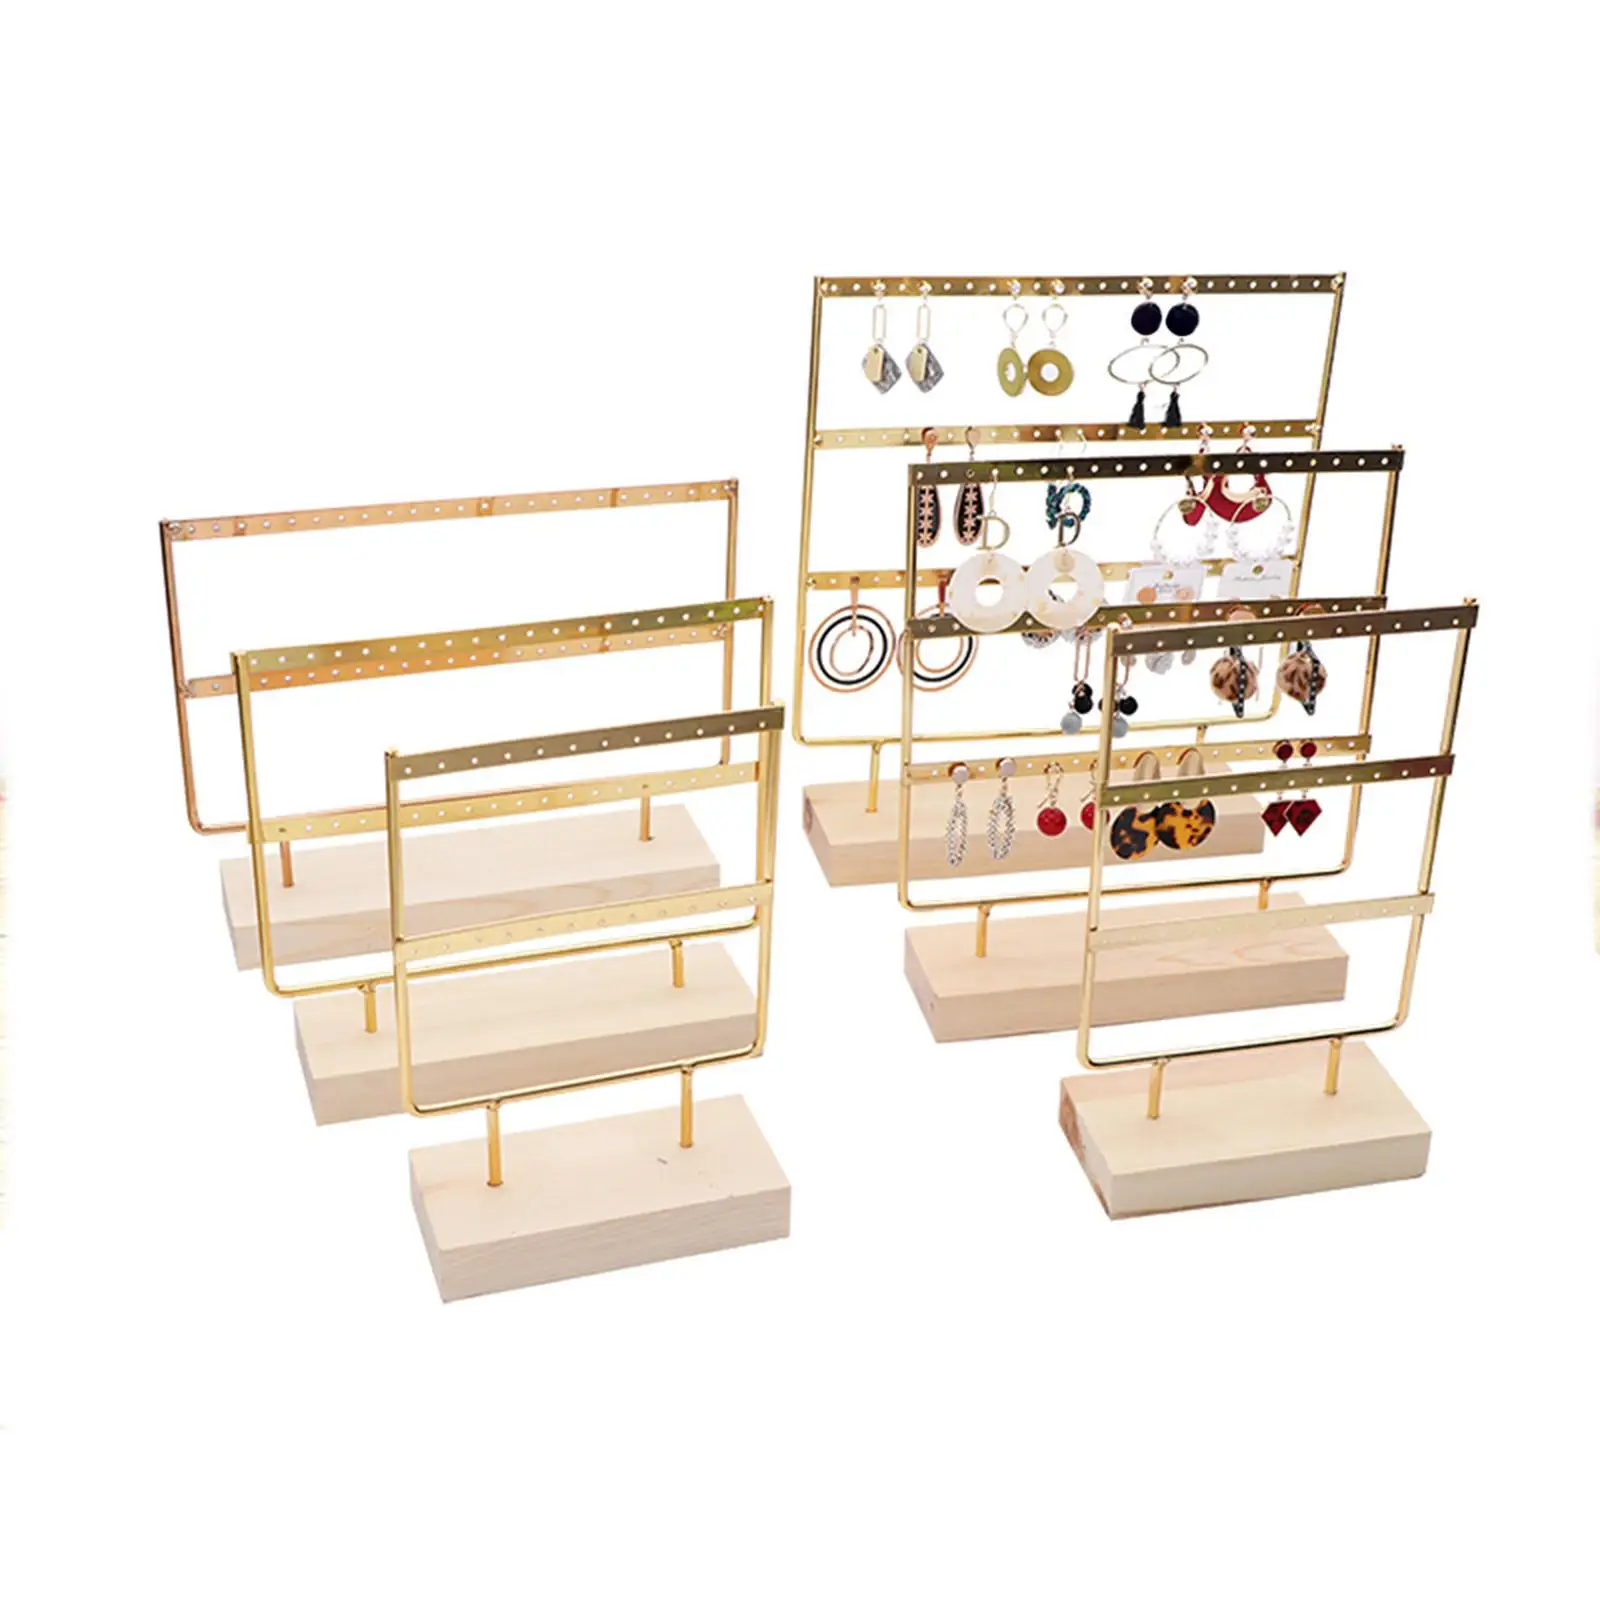 3 Tiers Earring Stand Ear Stud Holder Large Storage Metal with Holes Girls